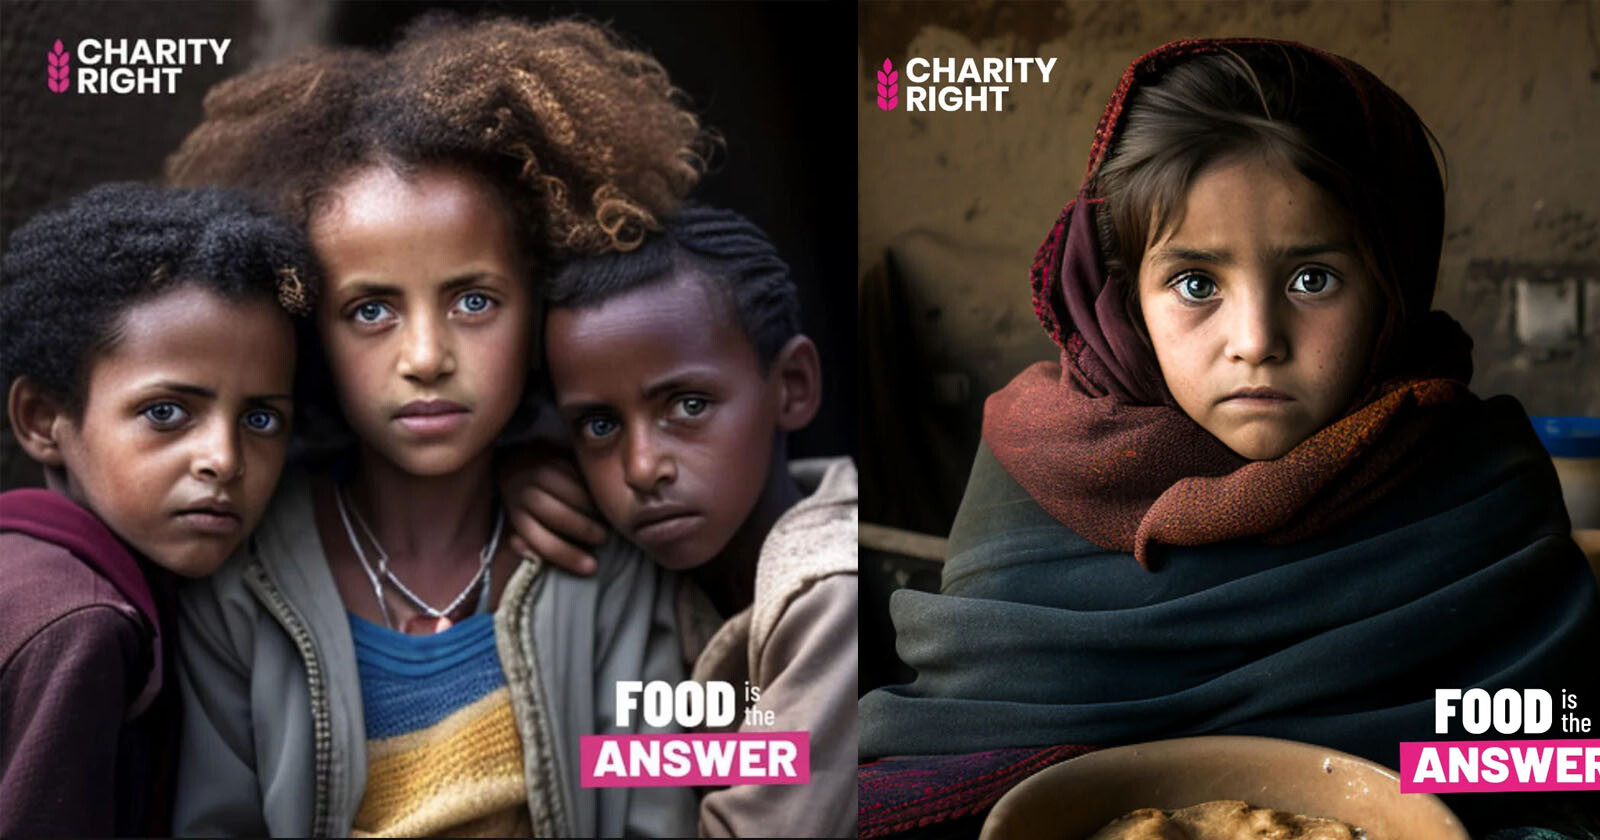 Charity Allegedly Uses AI Images in Advertisements